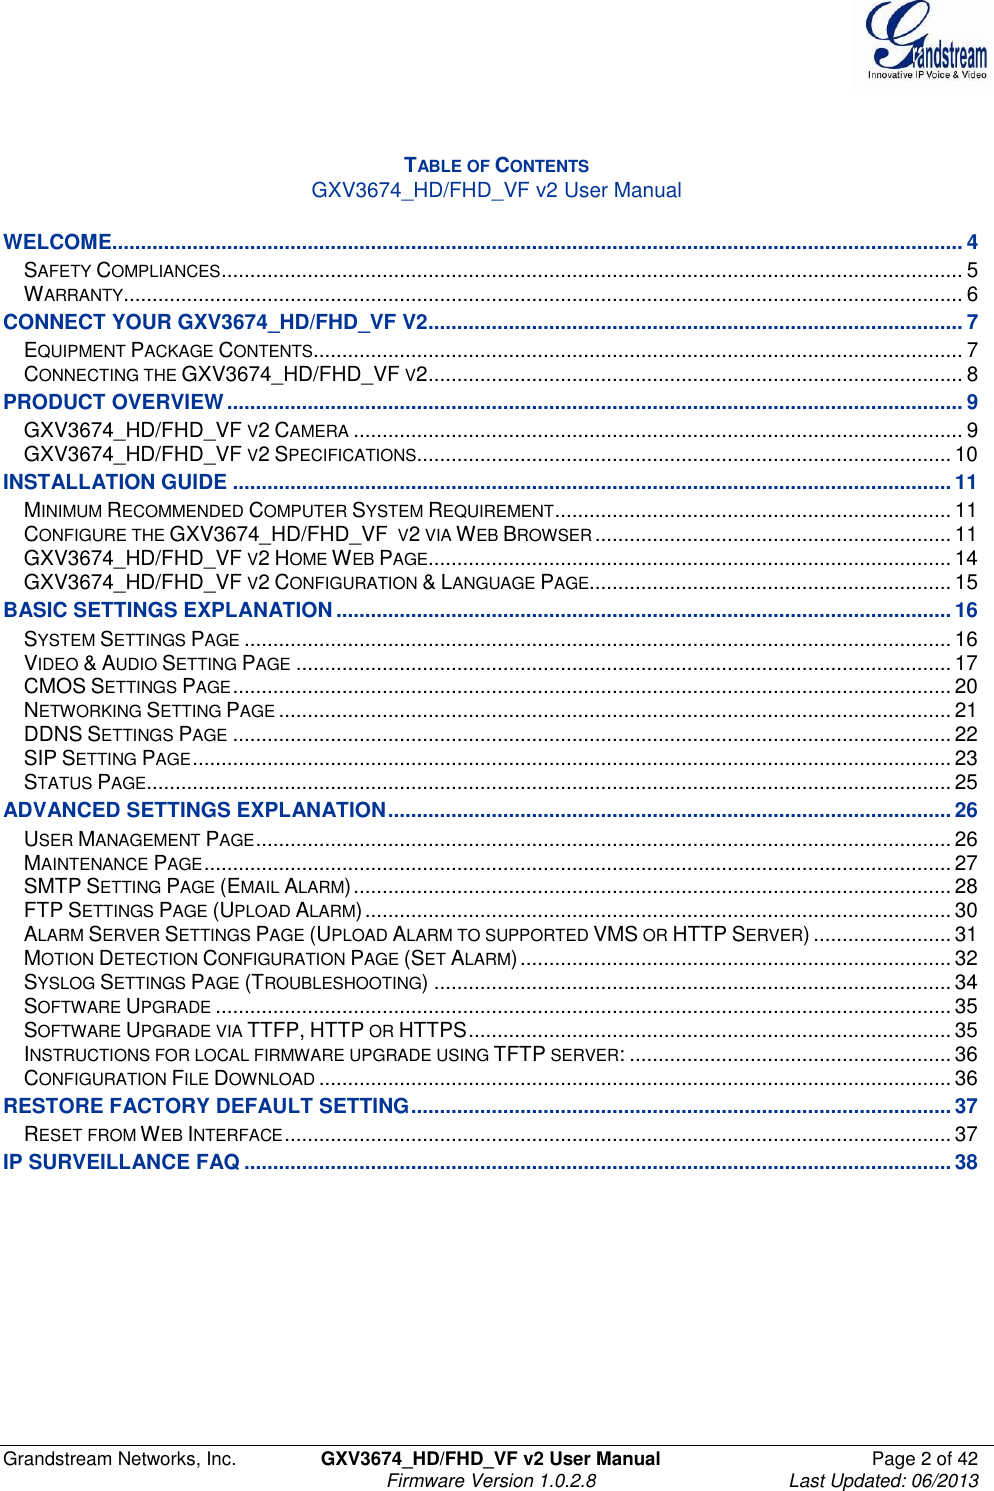  Grandstream Networks, Inc.  GXV3674_HD/FHD_VF v2 User Manual  Page 2 of 42   Firmware Version 1.0.2.8  Last Updated: 06/2013    TABLE OF CONTENTS GXV3674_HD/FHD_VF v2 User Manual  WELCOME.................................................................................................................................................... 4 SAFETY COMPLIANCES ................................................................................................................................. 5 WARRANTY .................................................................................................................................................. 6 CONNECT YOUR GXV3674_HD/FHD_VF V2 ............................................................................................. 7 EQUIPMENT PACKAGE CONTENTS ................................................................................................................. 7 CONNECTING THE GXV3674_HD/FHD_VF V2 ............................................................................................. 8 PRODUCT OVERVIEW ................................................................................................................................ 9 GXV3674_HD/FHD_VF V2 CAMERA .......................................................................................................... 9 GXV3674_HD/FHD_VF V2 SPECIFICATIONS ............................................................................................. 10 INSTALLATION GUIDE ............................................................................................................................. 11 MINIMUM RECOMMENDED COMPUTER SYSTEM REQUIREMENT ..................................................................... 11 CONFIGURE THE GXV3674_HD/FHD_VF  V2 VIA WEB BROWSER .............................................................. 11 GXV3674_HD/FHD_VF V2 HOME WEB PAGE ........................................................................................... 14 GXV3674_HD/FHD_VF V2 CONFIGURATION &amp; LANGUAGE PAGE............................................................... 15 BASIC SETTINGS EXPLANATION ........................................................................................................... 16 SYSTEM SETTINGS PAGE ........................................................................................................................... 16 VIDEO &amp; AUDIO SETTING PAGE .................................................................................................................. 17 CMOS SETTINGS PAGE ............................................................................................................................. 20 NETWORKING SETTING PAGE ..................................................................................................................... 21 DDNS SETTINGS PAGE ............................................................................................................................. 22 SIP SETTING PAGE .................................................................................................................................... 23 STATUS PAGE ............................................................................................................................................ 25 ADVANCED SETTINGS EXPLANATION .................................................................................................. 26 USER MANAGEMENT PAGE ......................................................................................................................... 26 MAINTENANCE PAGE .................................................................................................................................. 27 SMTP SETTING PAGE (EMAIL ALARM) ........................................................................................................ 28 FTP SETTINGS PAGE (UPLOAD ALARM) ...................................................................................................... 30 ALARM SERVER SETTINGS PAGE (UPLOAD ALARM TO SUPPORTED VMS OR HTTP SERVER) ........................ 31 MOTION DETECTION CONFIGURATION PAGE (SET ALARM) ........................................................................... 32 SYSLOG SETTINGS PAGE (TROUBLESHOOTING) .......................................................................................... 34 SOFTWARE UPGRADE ................................................................................................................................ 35 SOFTWARE UPGRADE VIA TTFP, HTTP OR HTTPS .................................................................................... 35 INSTRUCTIONS FOR LOCAL FIRMWARE UPGRADE USING TFTP SERVER: ........................................................ 36 CONFIGURATION FILE DOWNLOAD .............................................................................................................. 36 RESTORE FACTORY DEFAULT SETTING .............................................................................................. 37 RESET FROM WEB INTERFACE .................................................................................................................... 37 IP SURVEILLANCE FAQ ........................................................................................................................... 38       